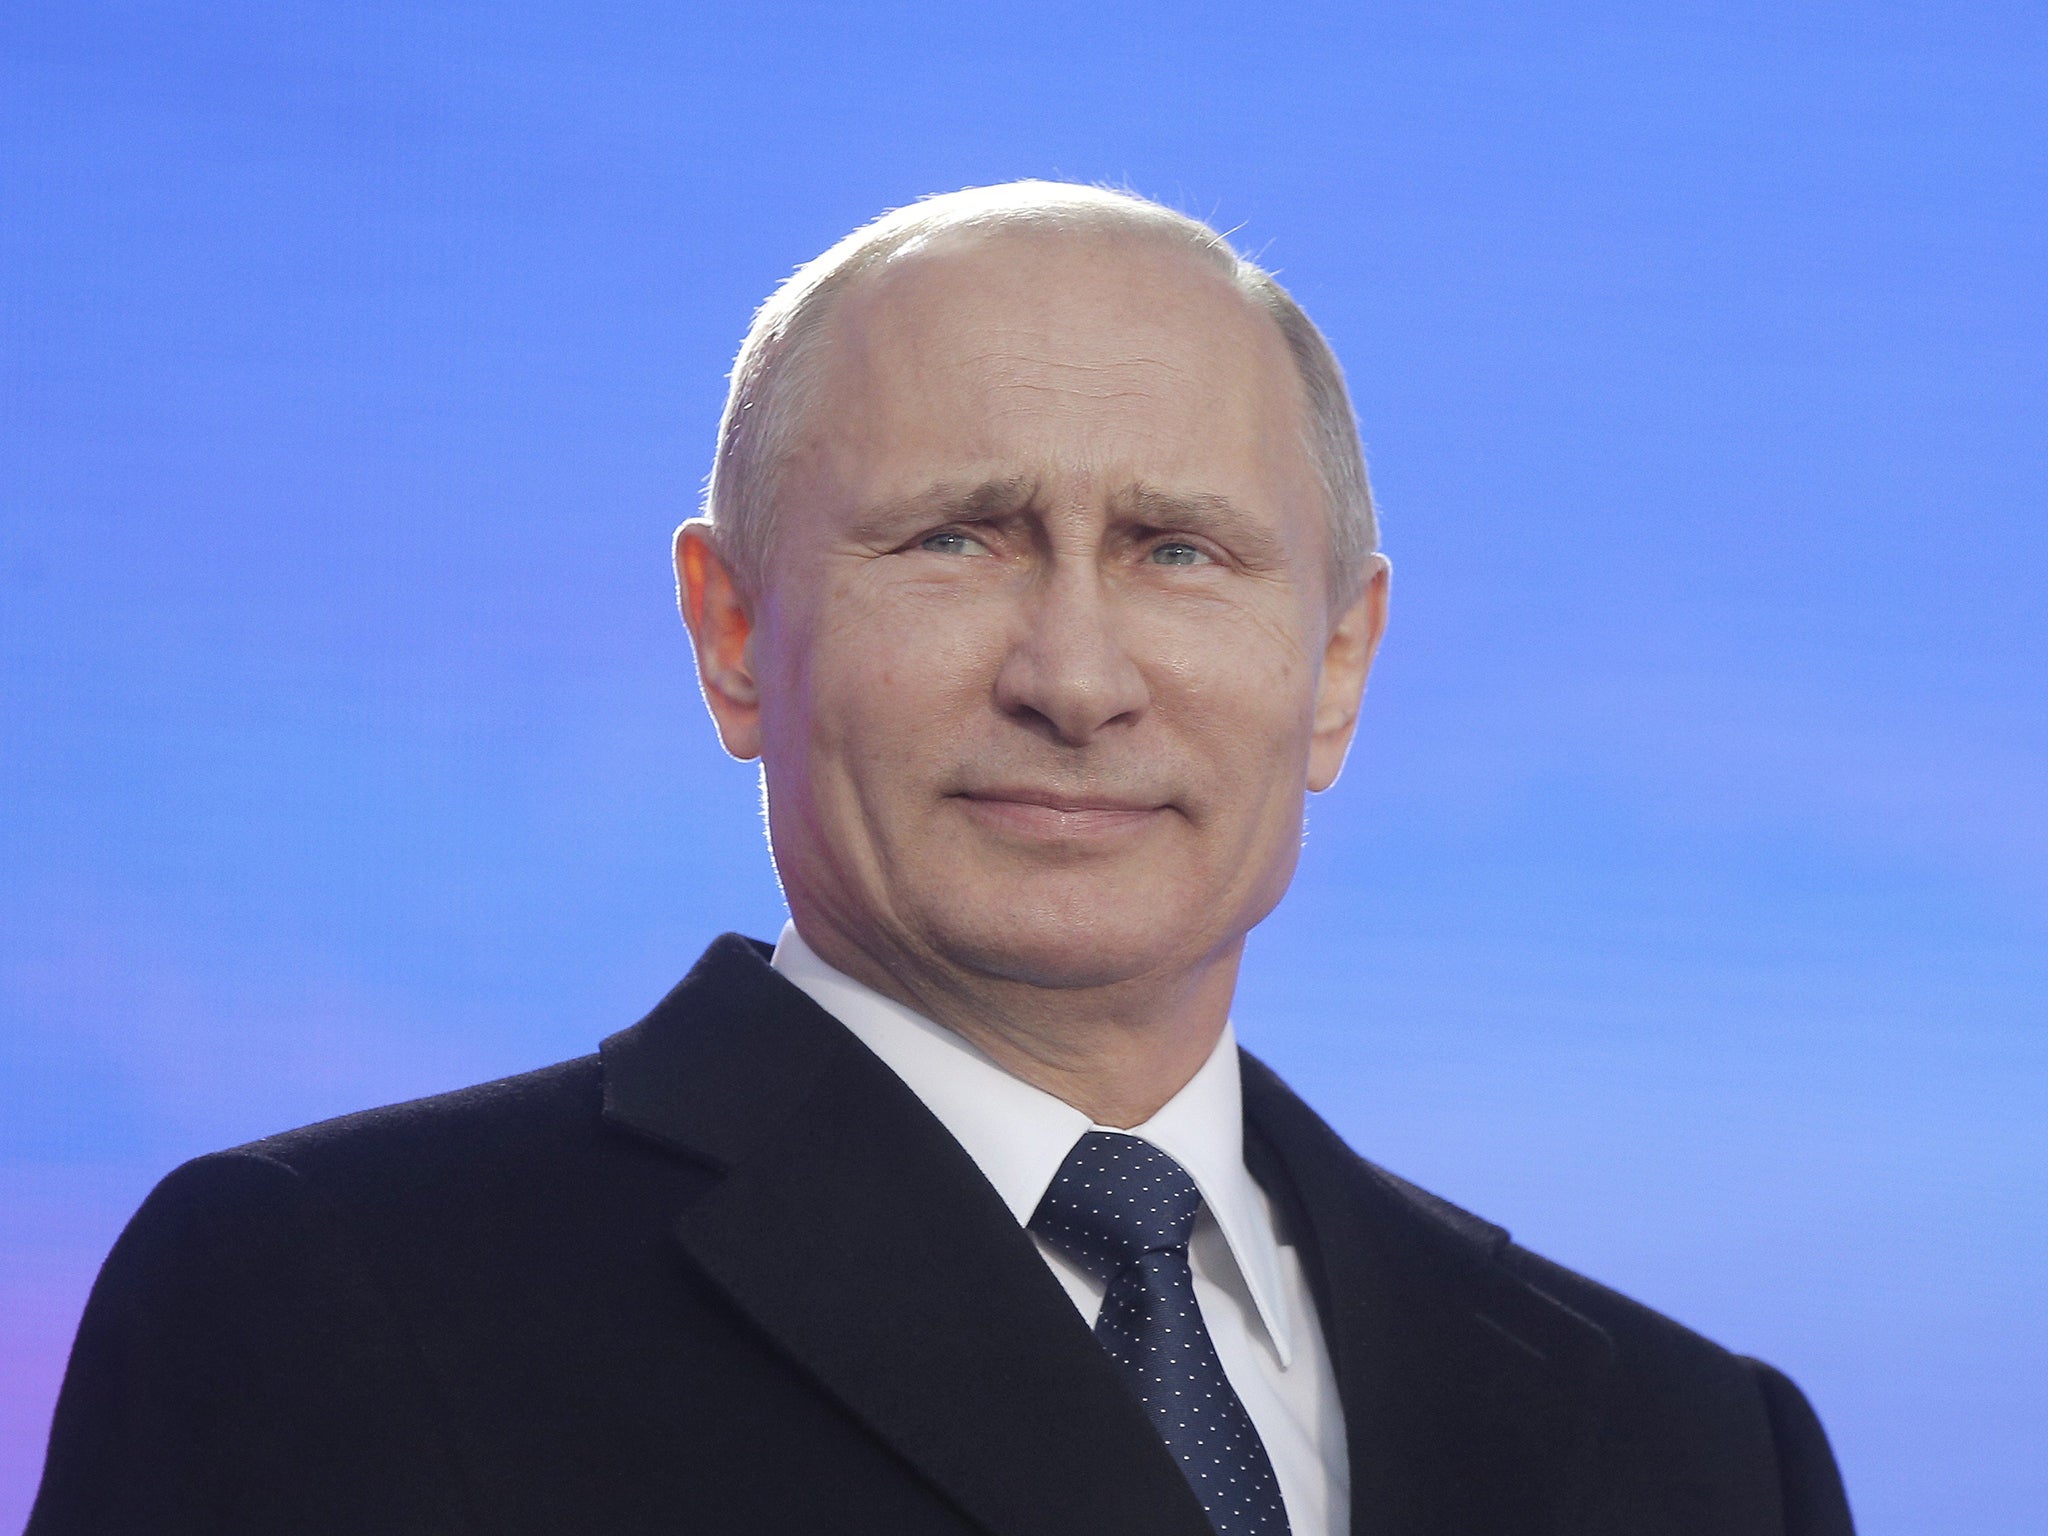 Putin has declared that all military deaths will be classified as a state secret